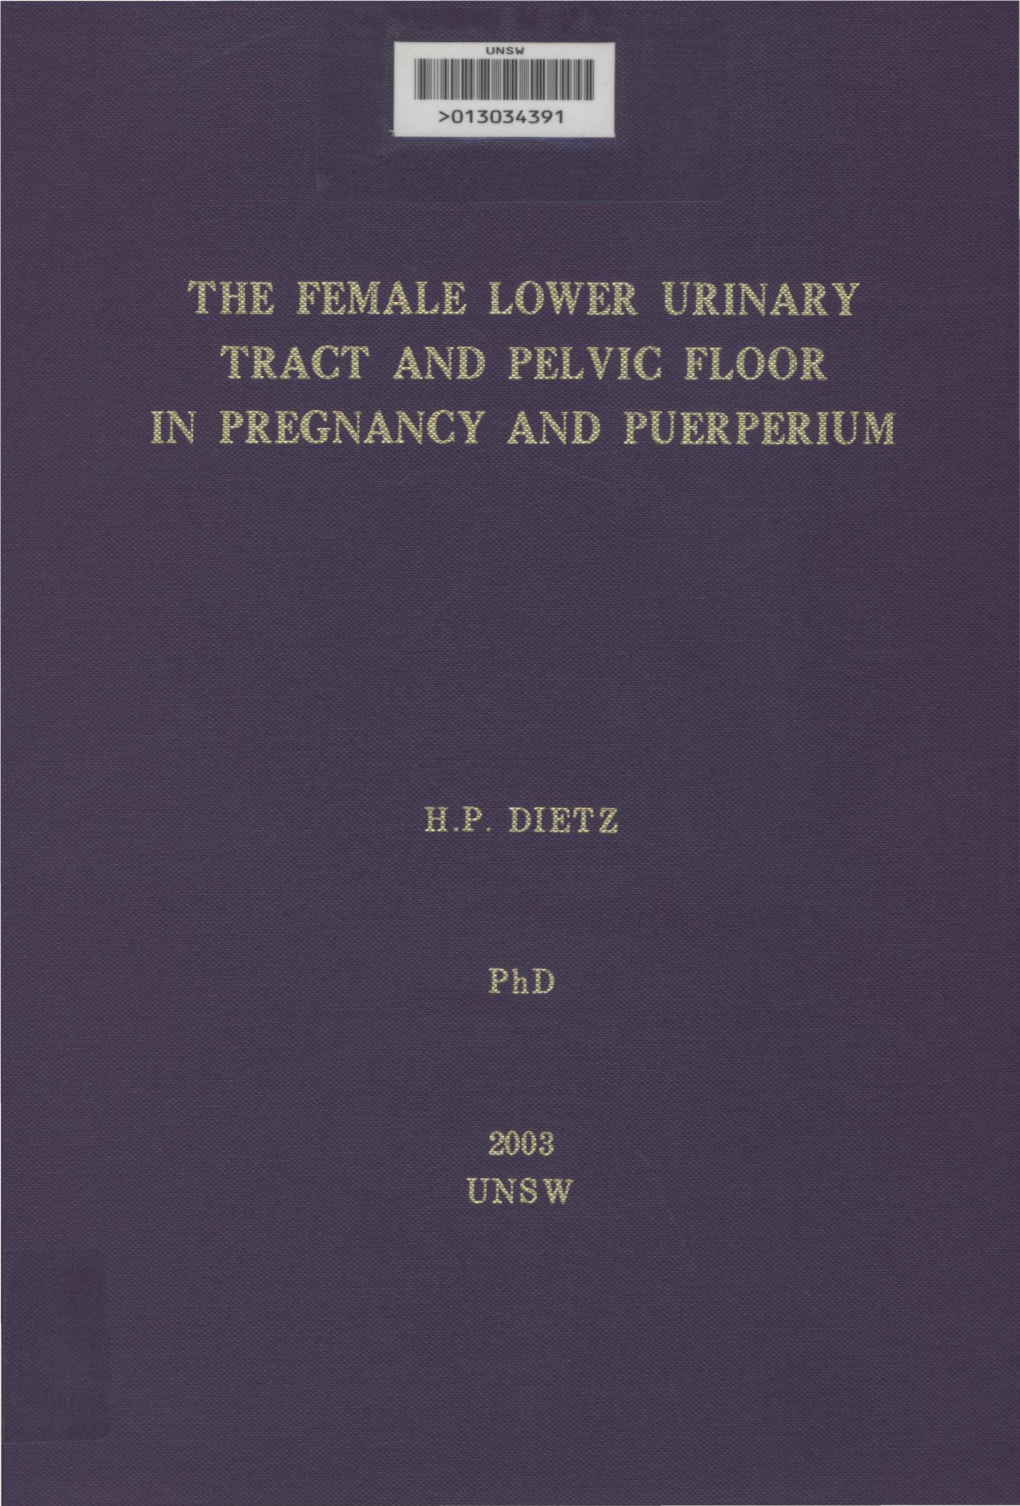 The Female Lower Urinary Tract and Pelvic Floor in Pregnancy and Puerperium